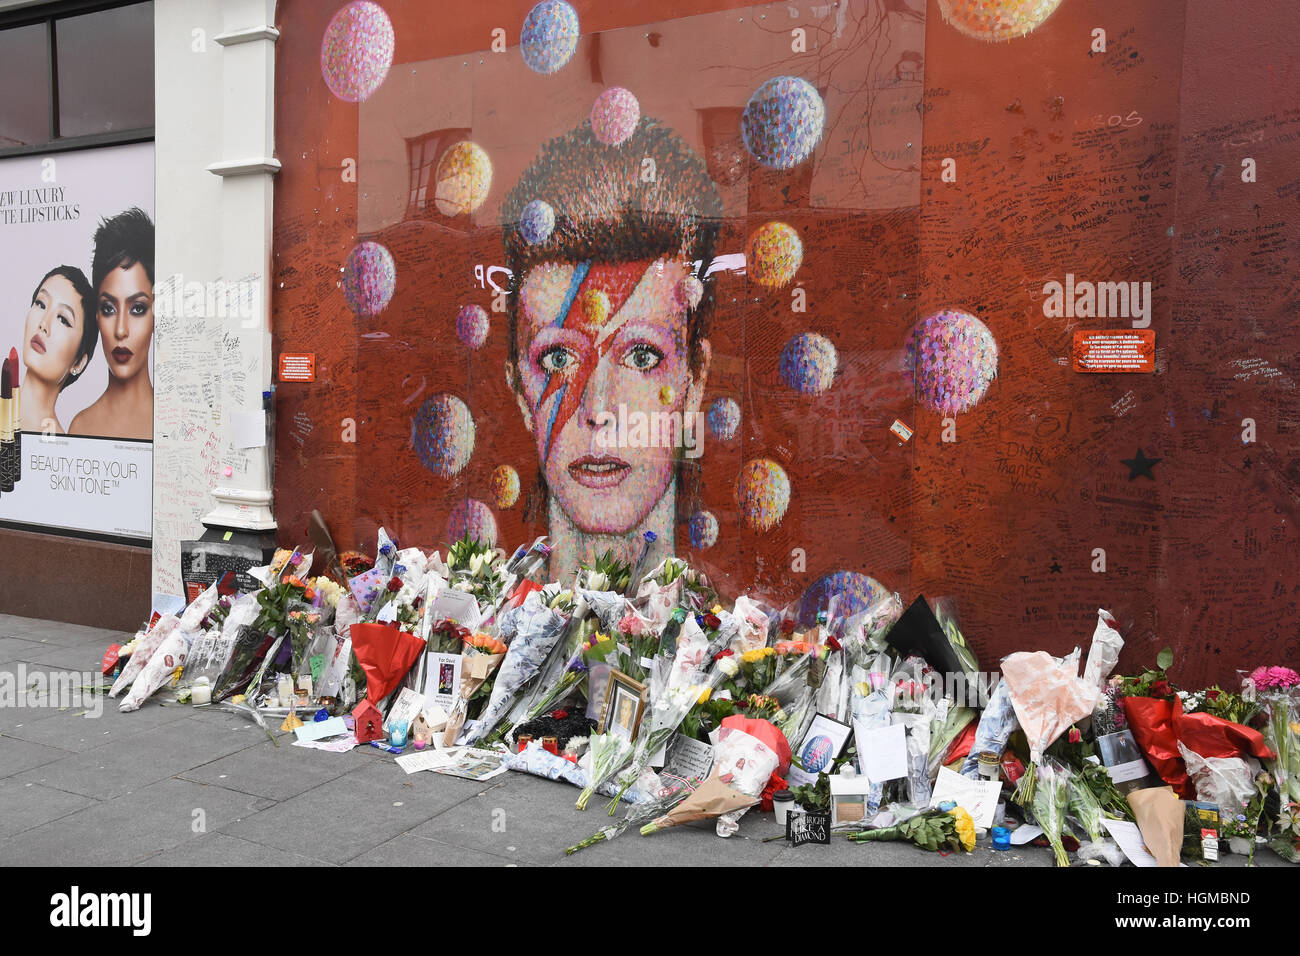 Floral tributes to David Bowie left by fans at the mural in Brixton on the first anniversary of his death,Brixton,London.UK Stock Photo